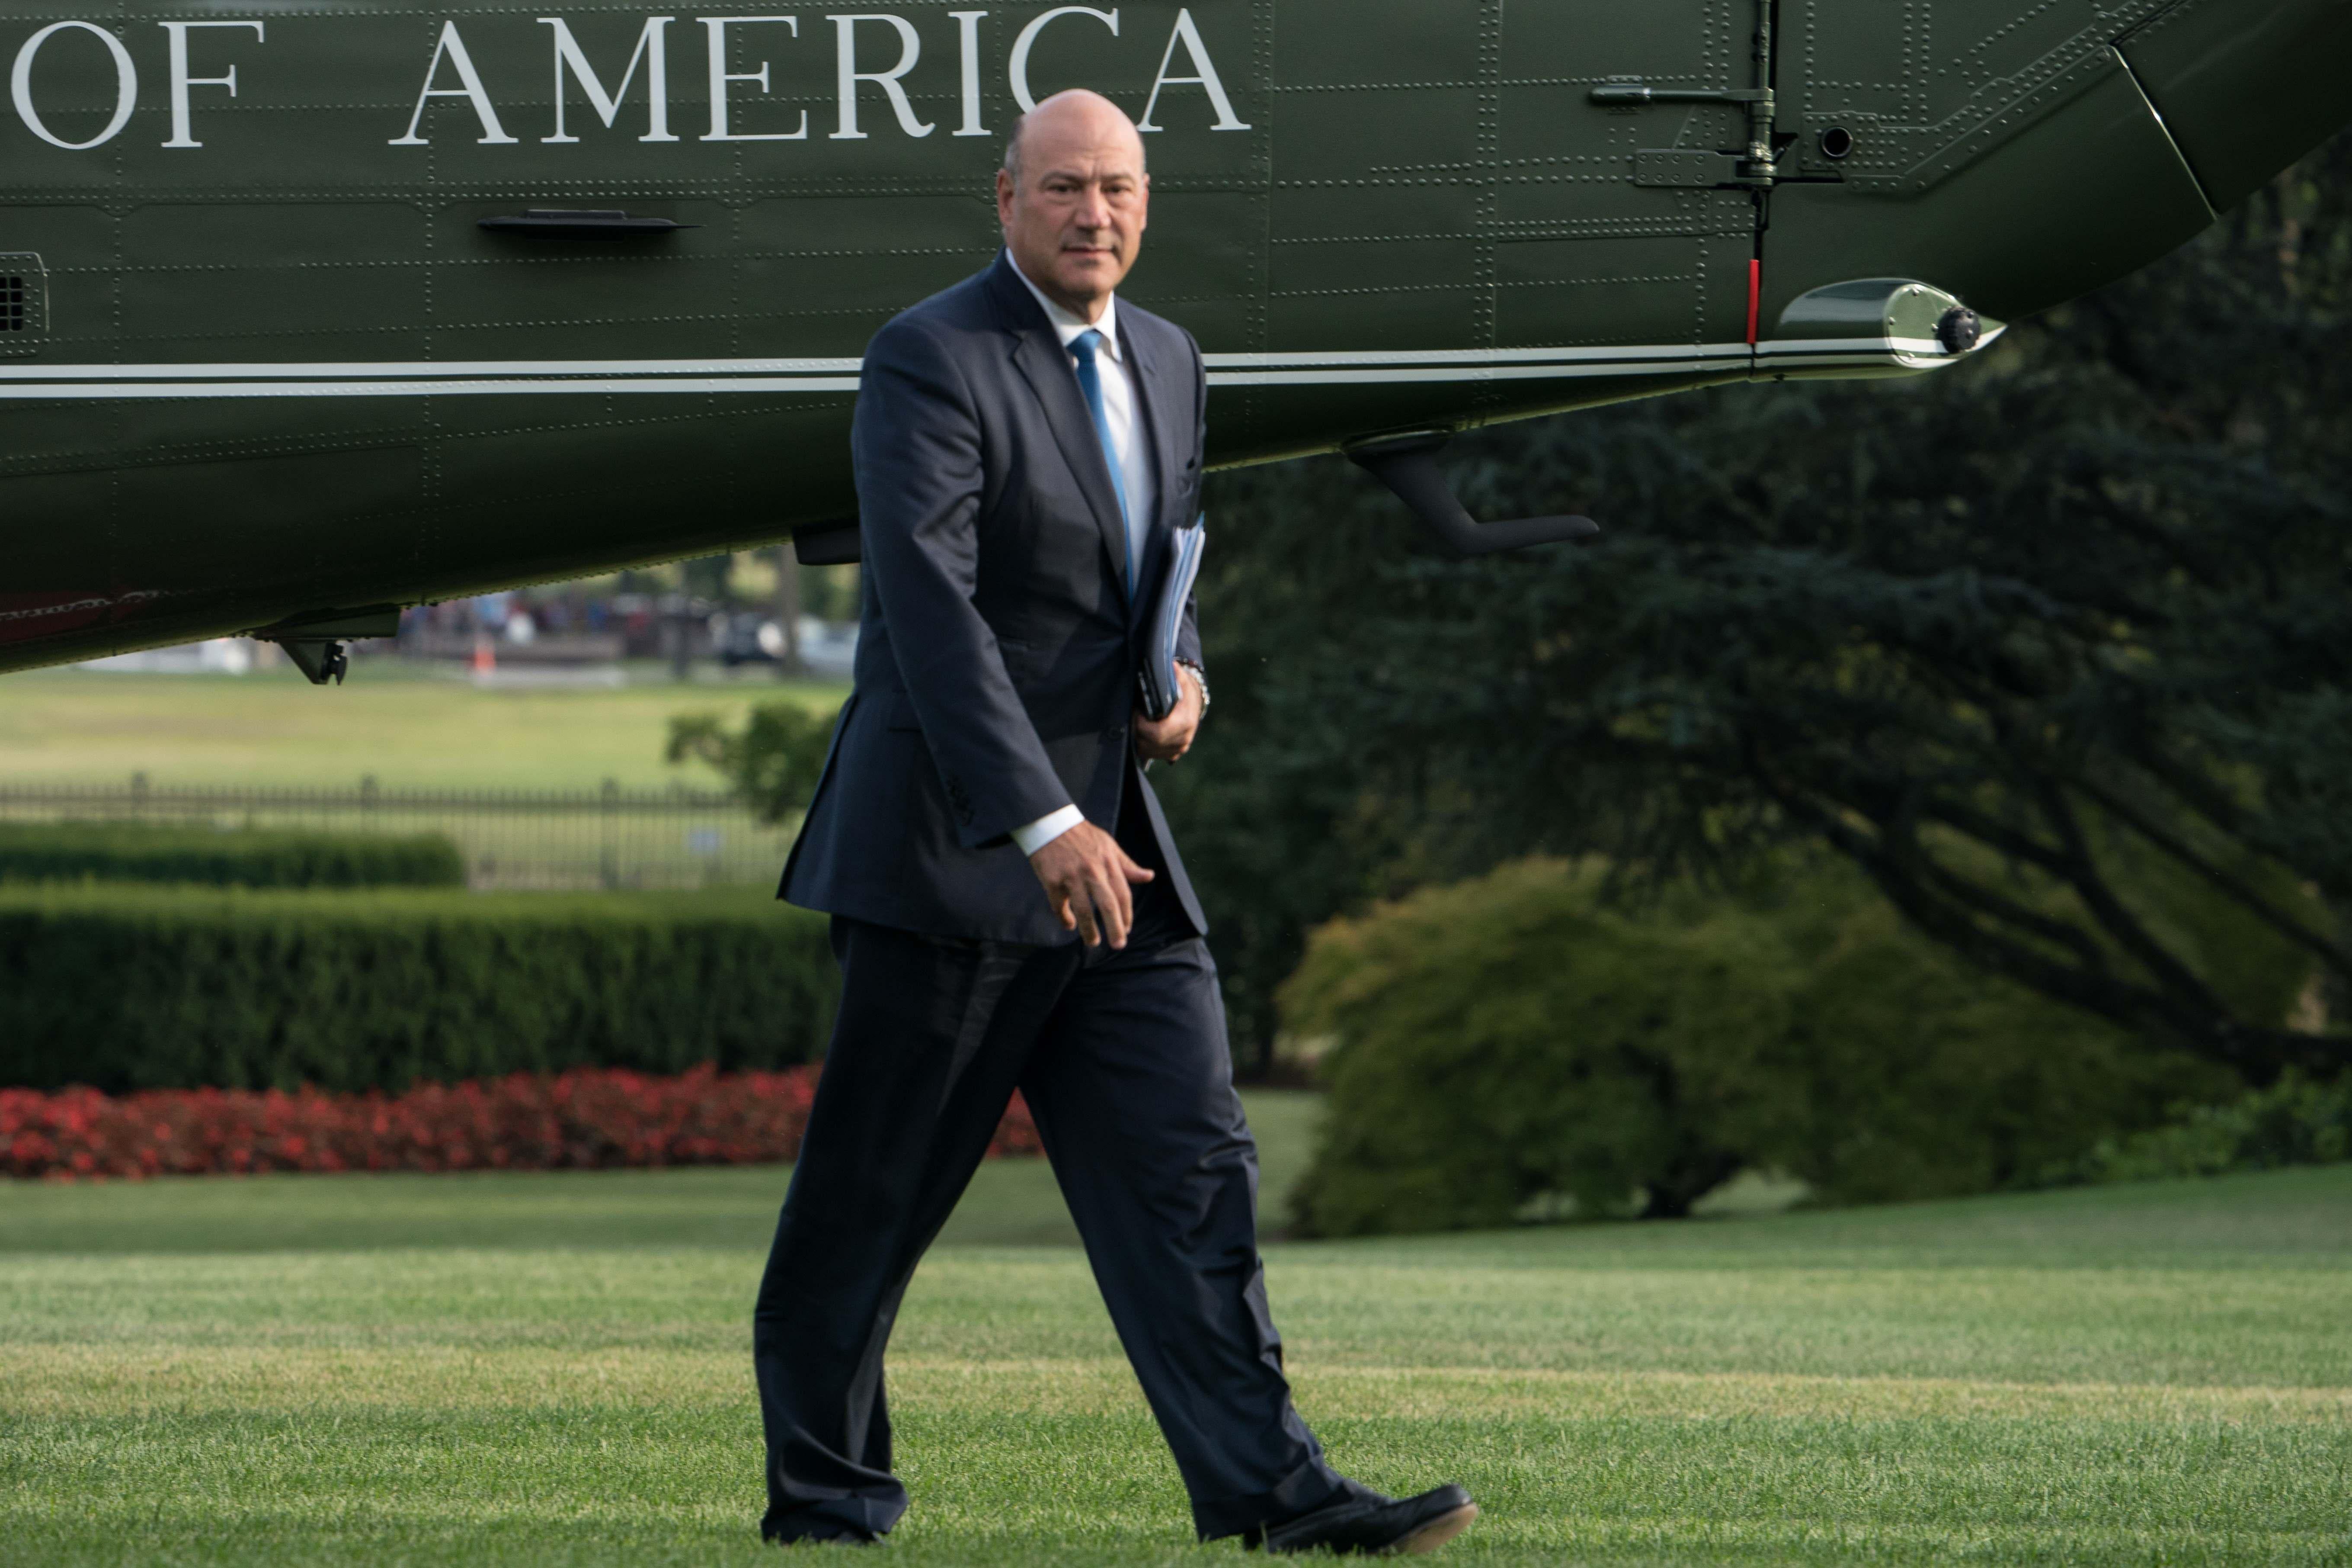 White House economic adviser Gary Cohn walks to the White House in Washington, DC, on August 30, 2017 upon return from Springfield, Missouri, where President Donald Trump spoke about tax reform.